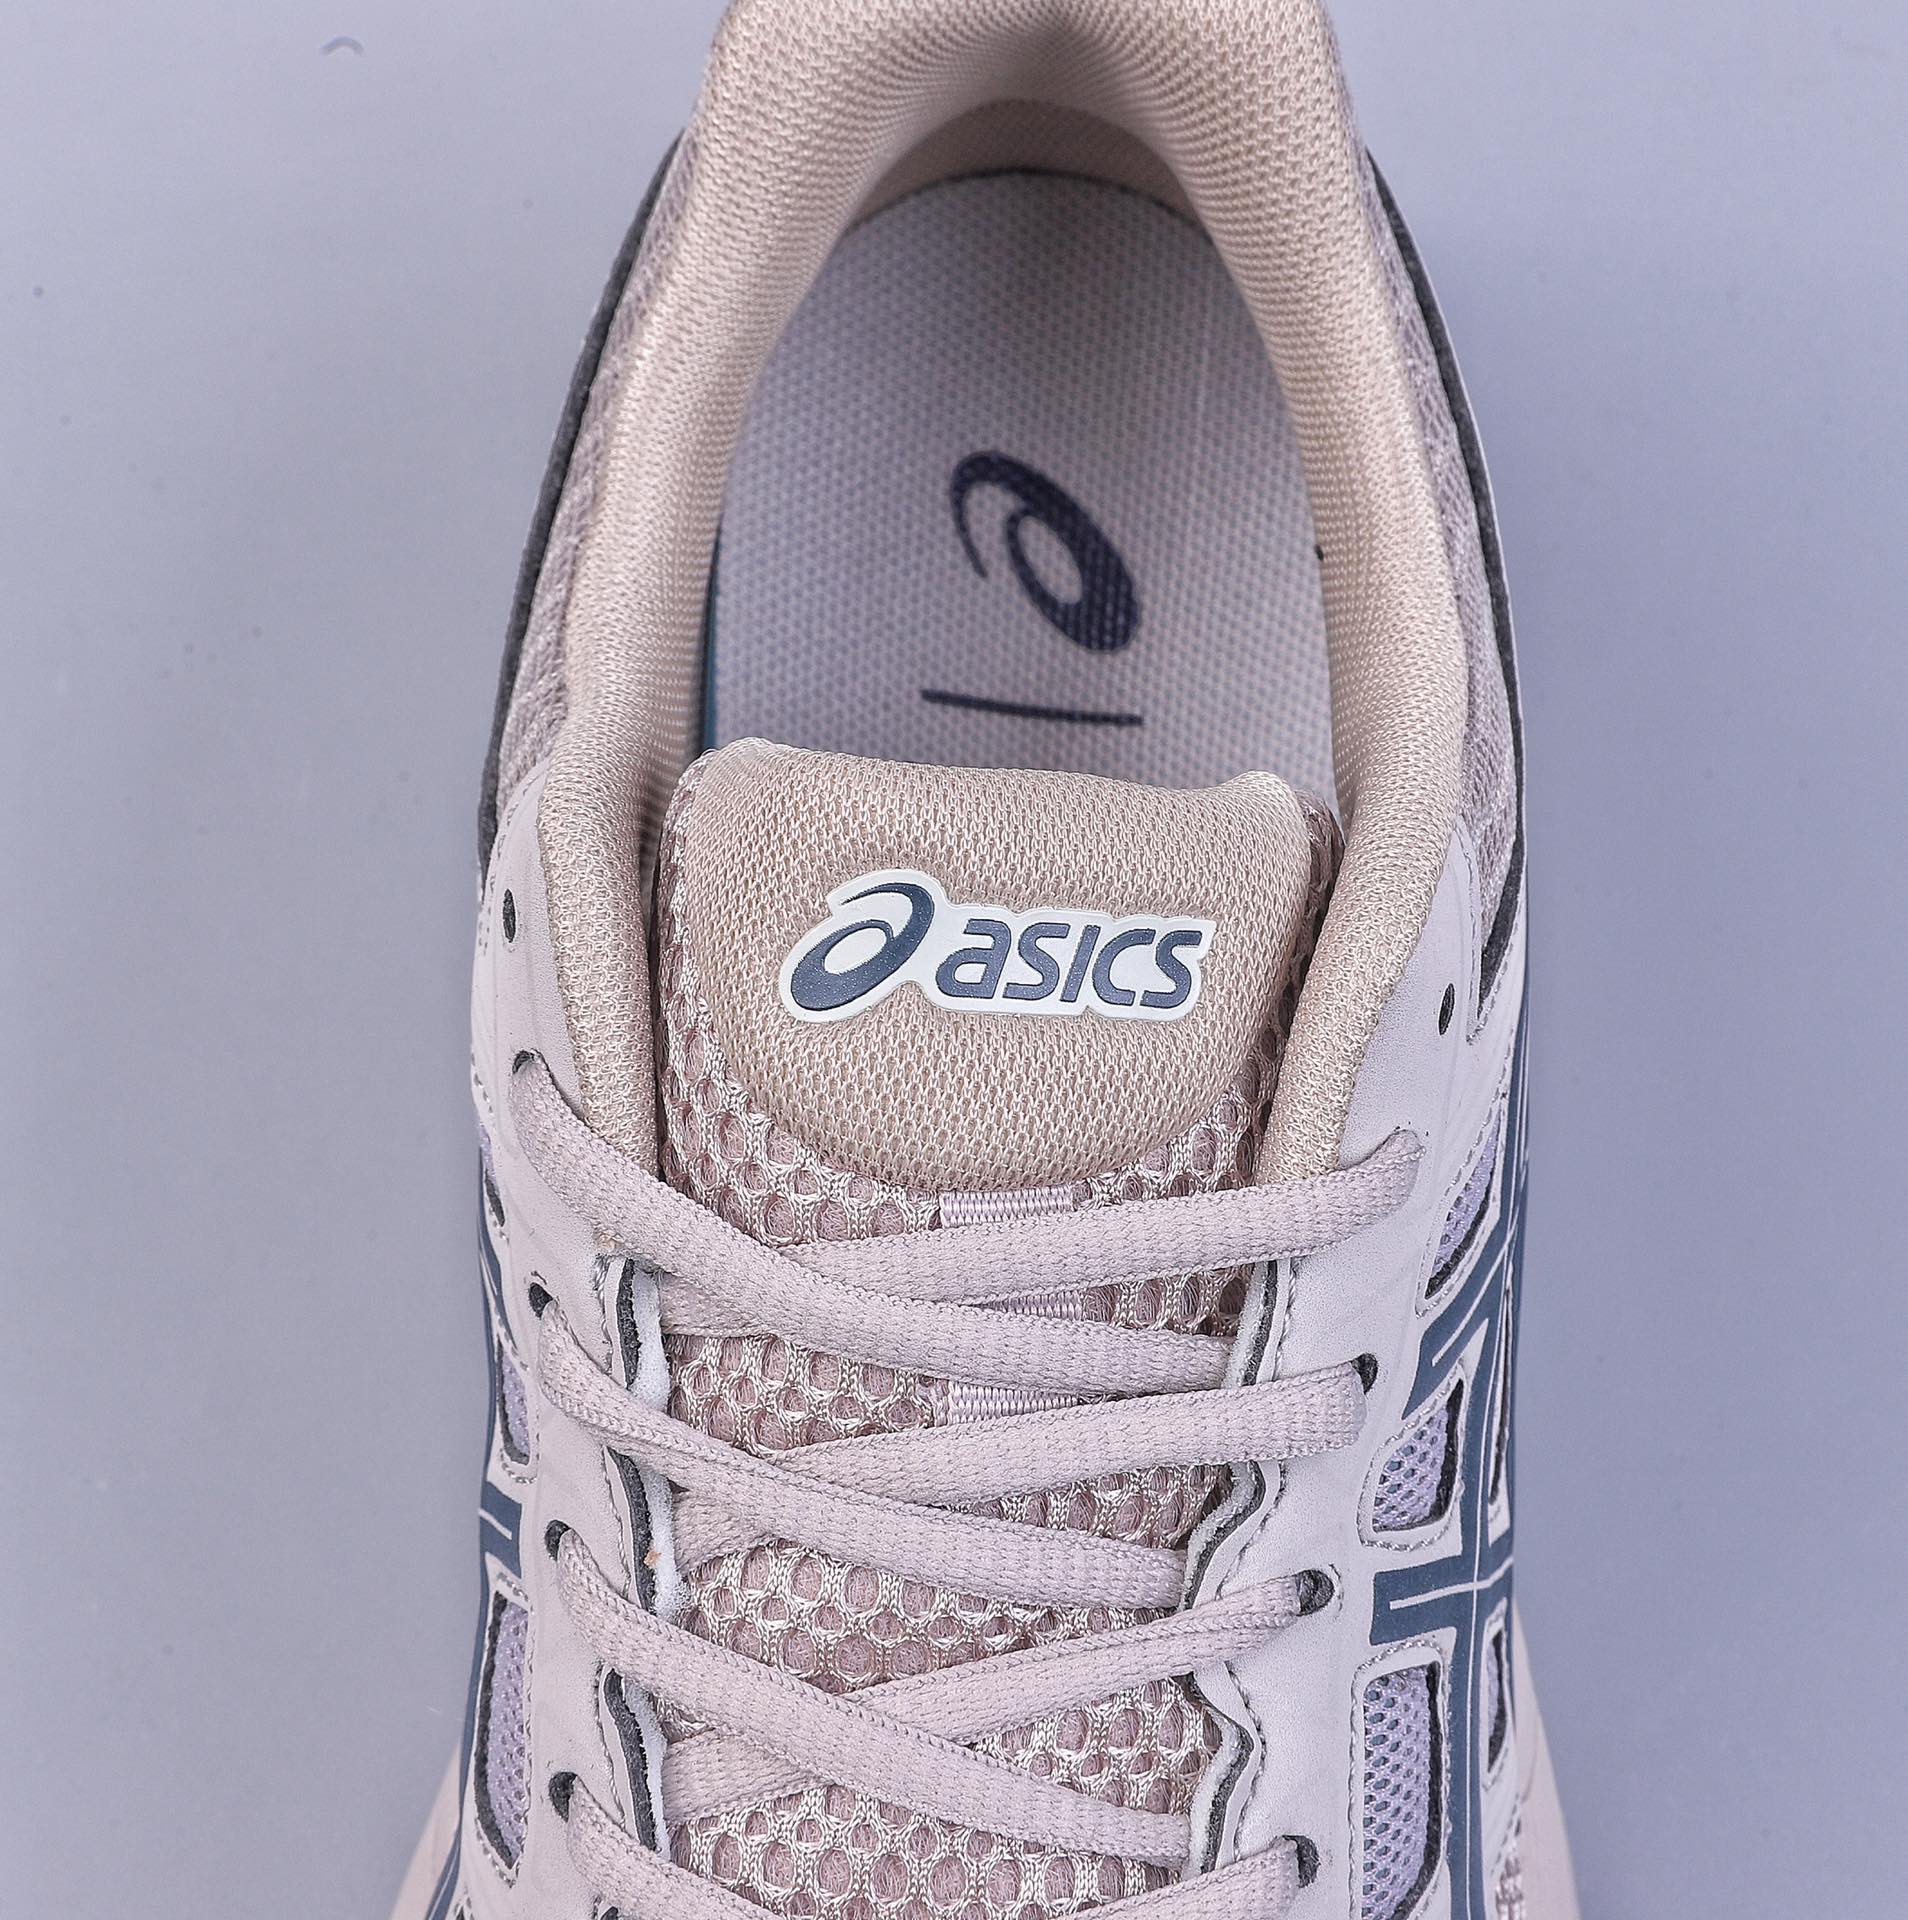 Asics Gel-Contend 4 low-top urban leisure sports running shoes 